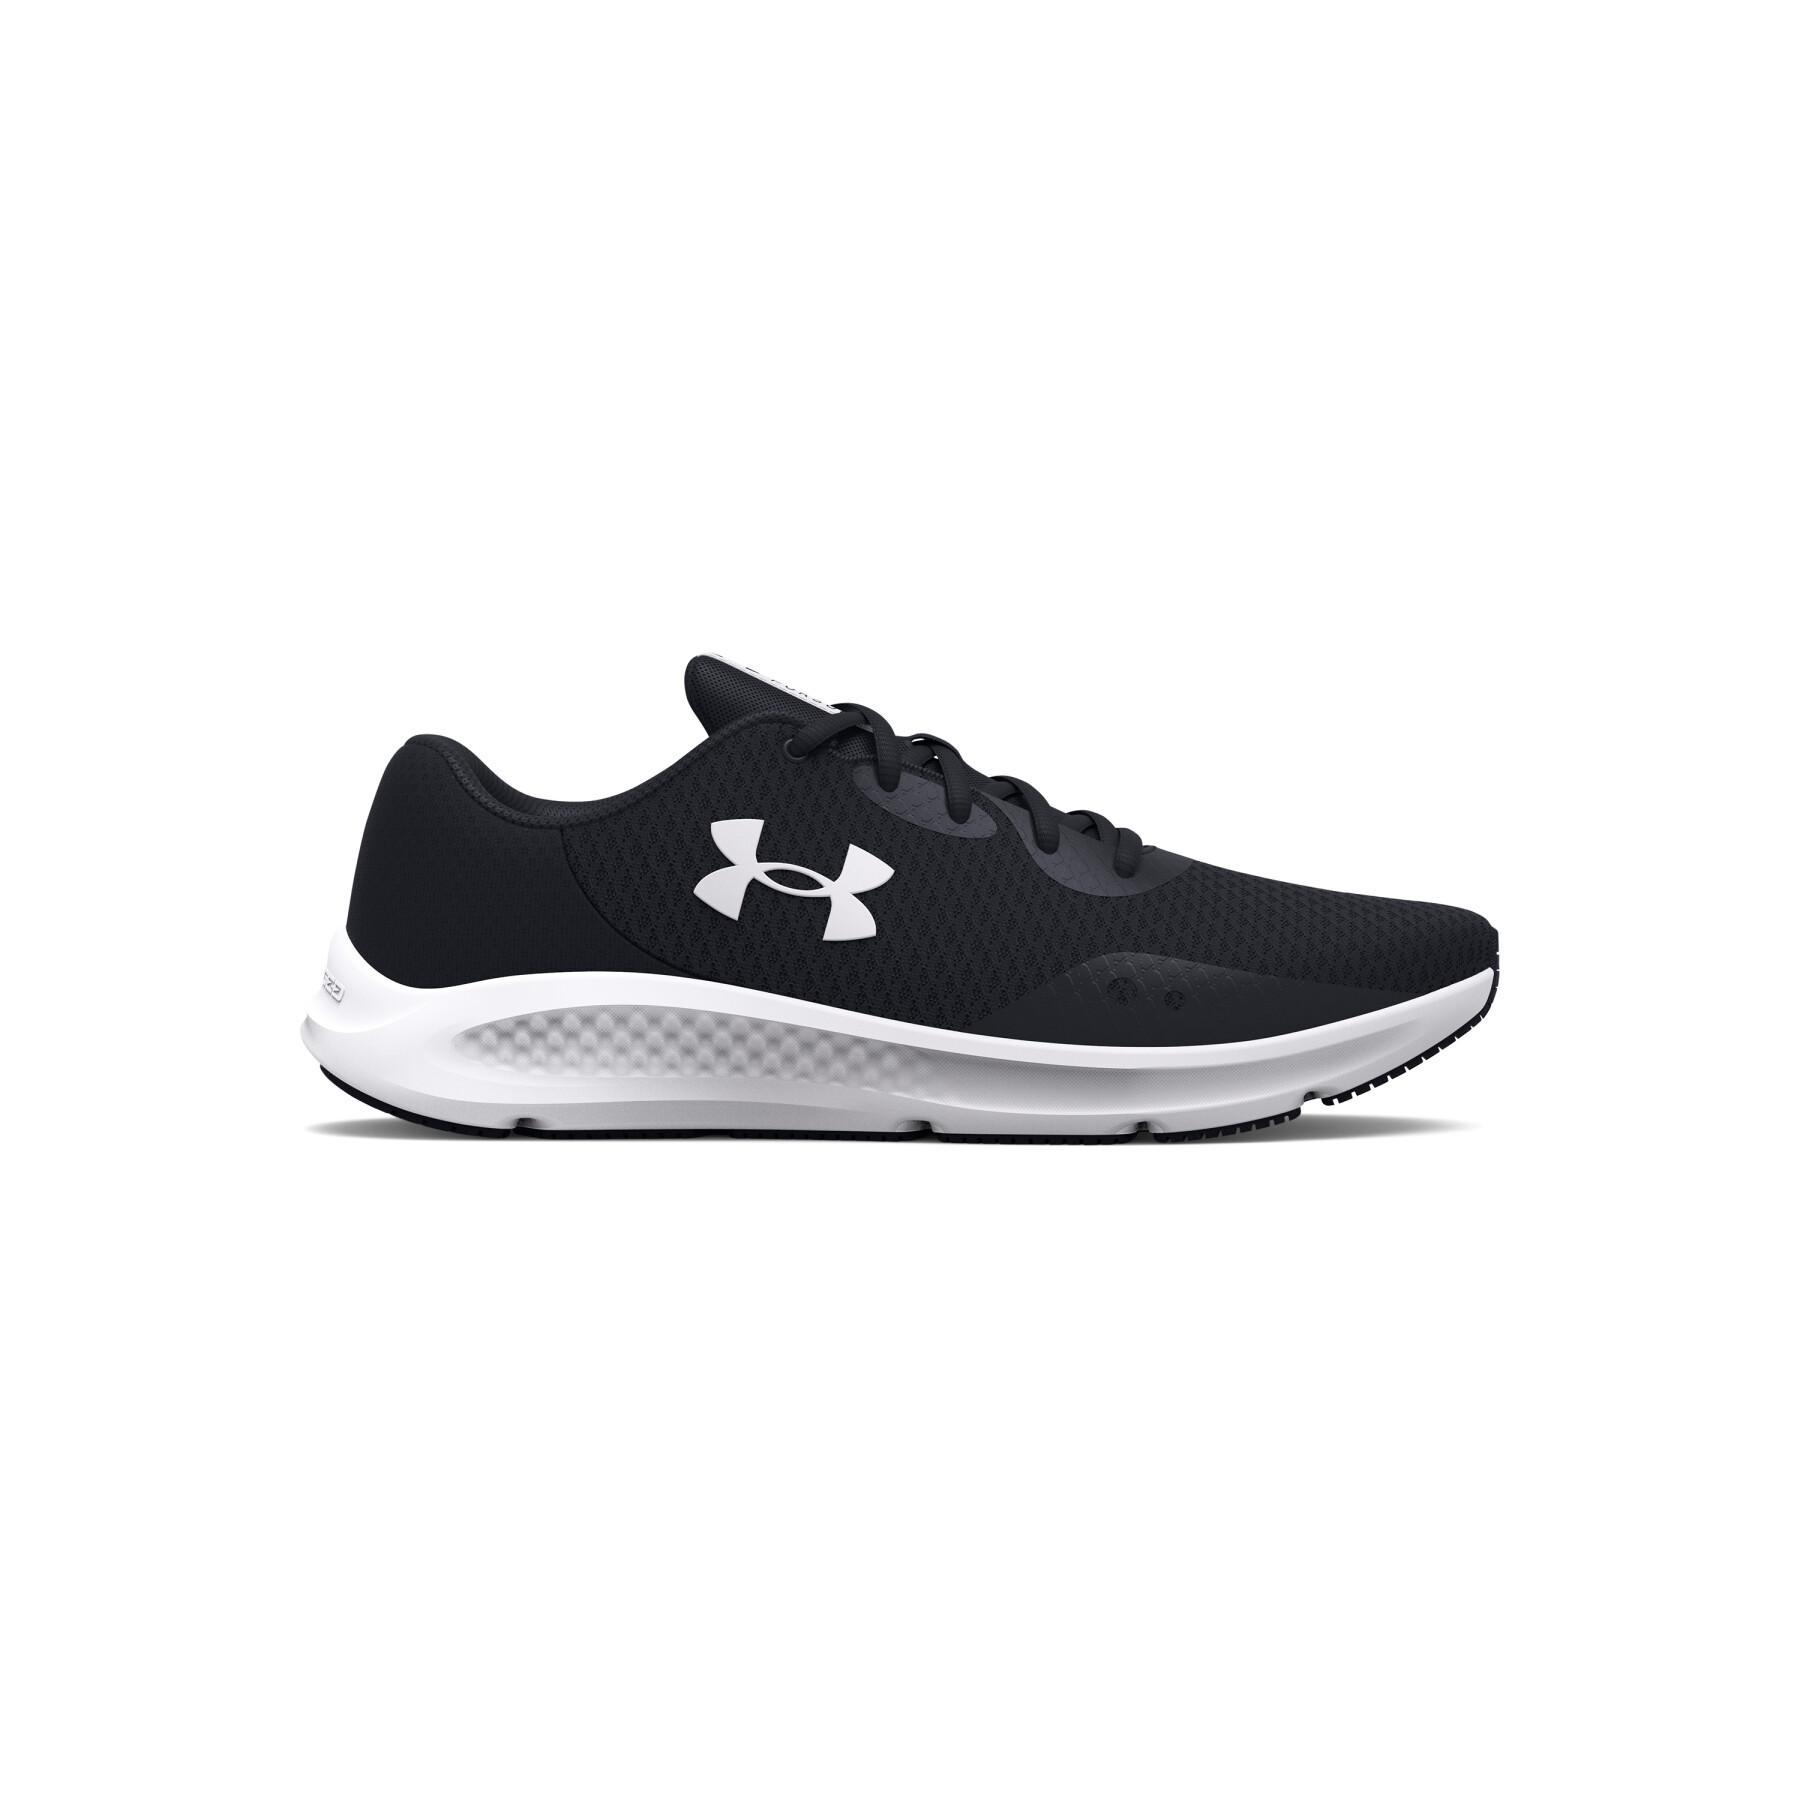 Women's running shoes Under Armour Charged pursuit 3